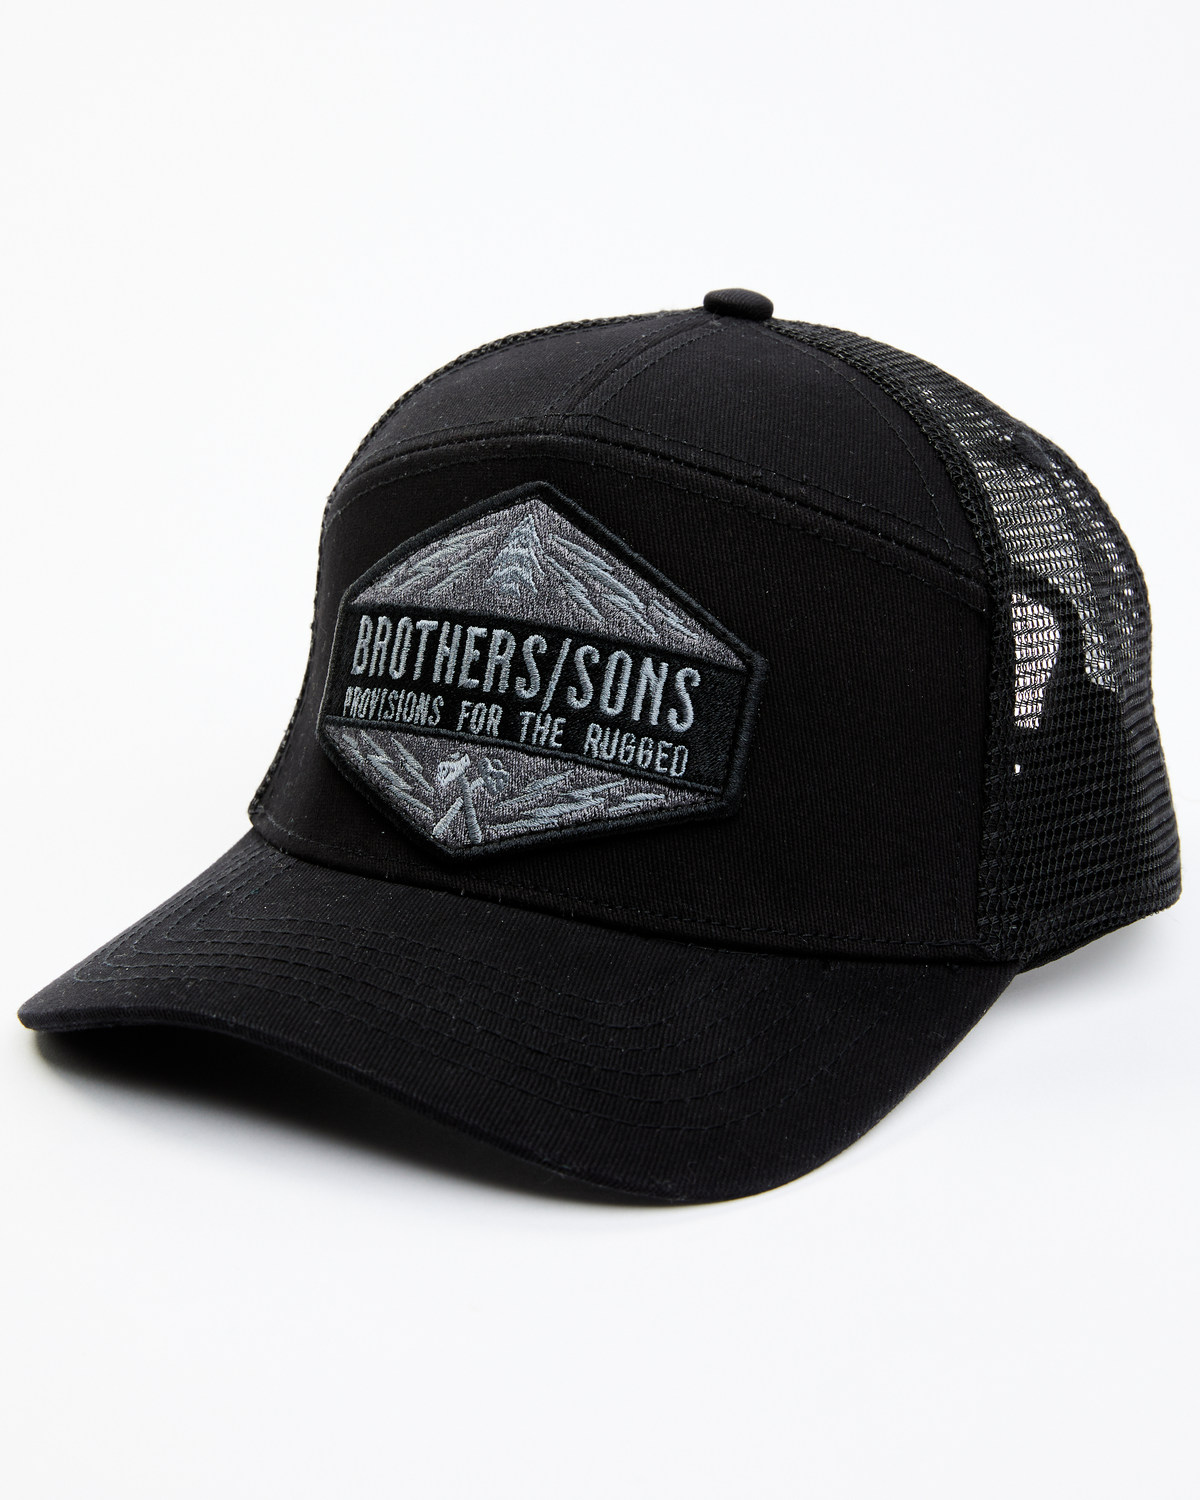 Brothers and Sons Men's Provisions For The Rugged Patch Ball Cap